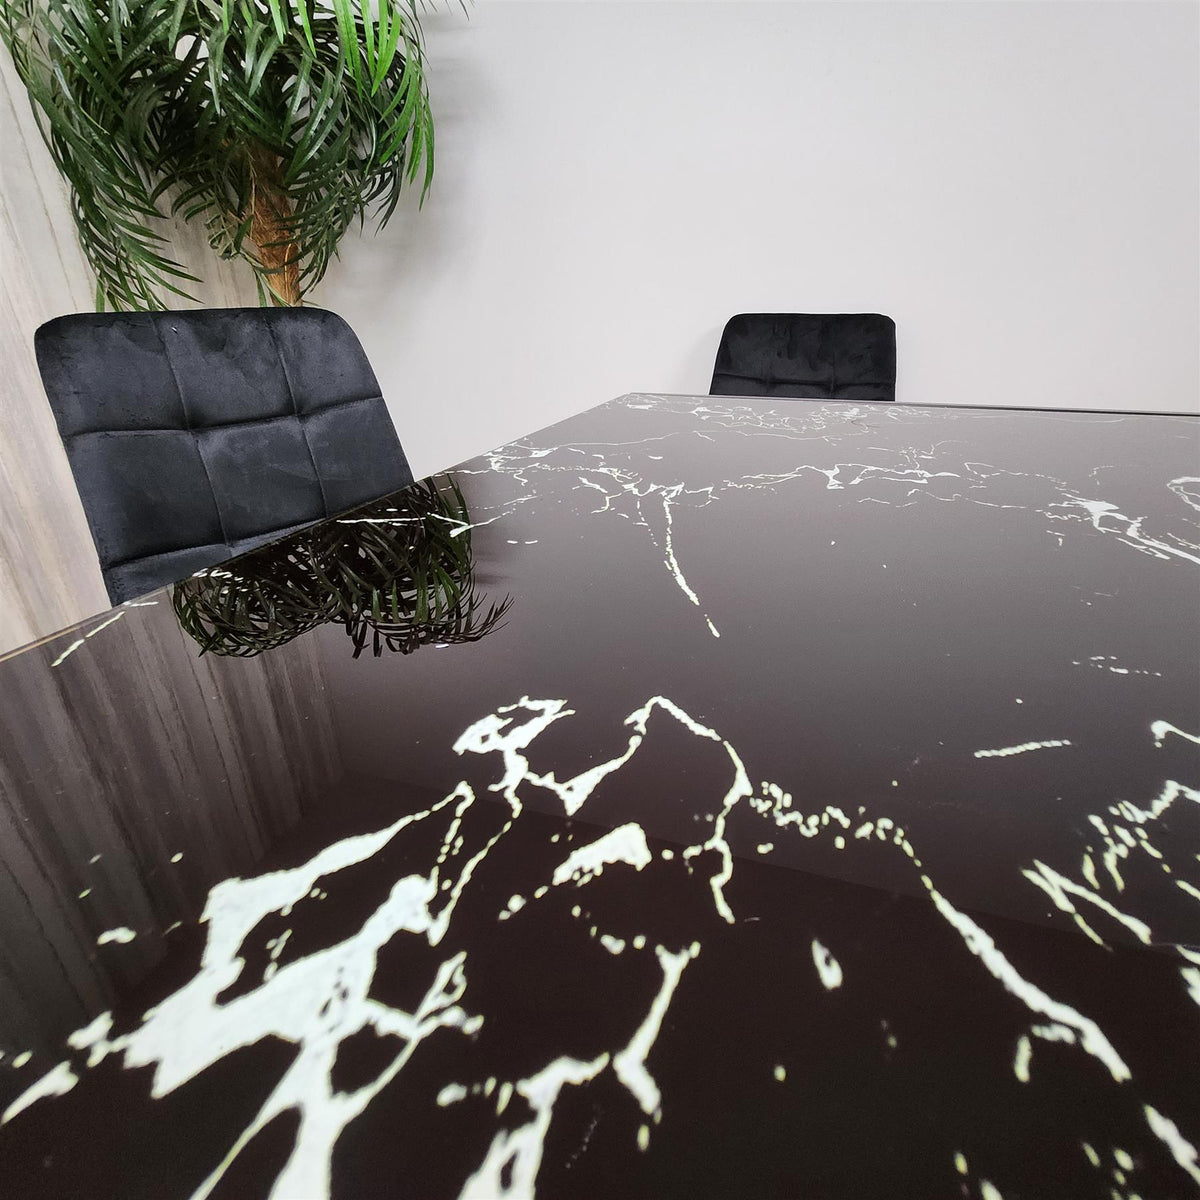 Dining Table and 4 Chairs Black Marble Effect Glass 4 Velvet Black Chairs Dining Room Furniture